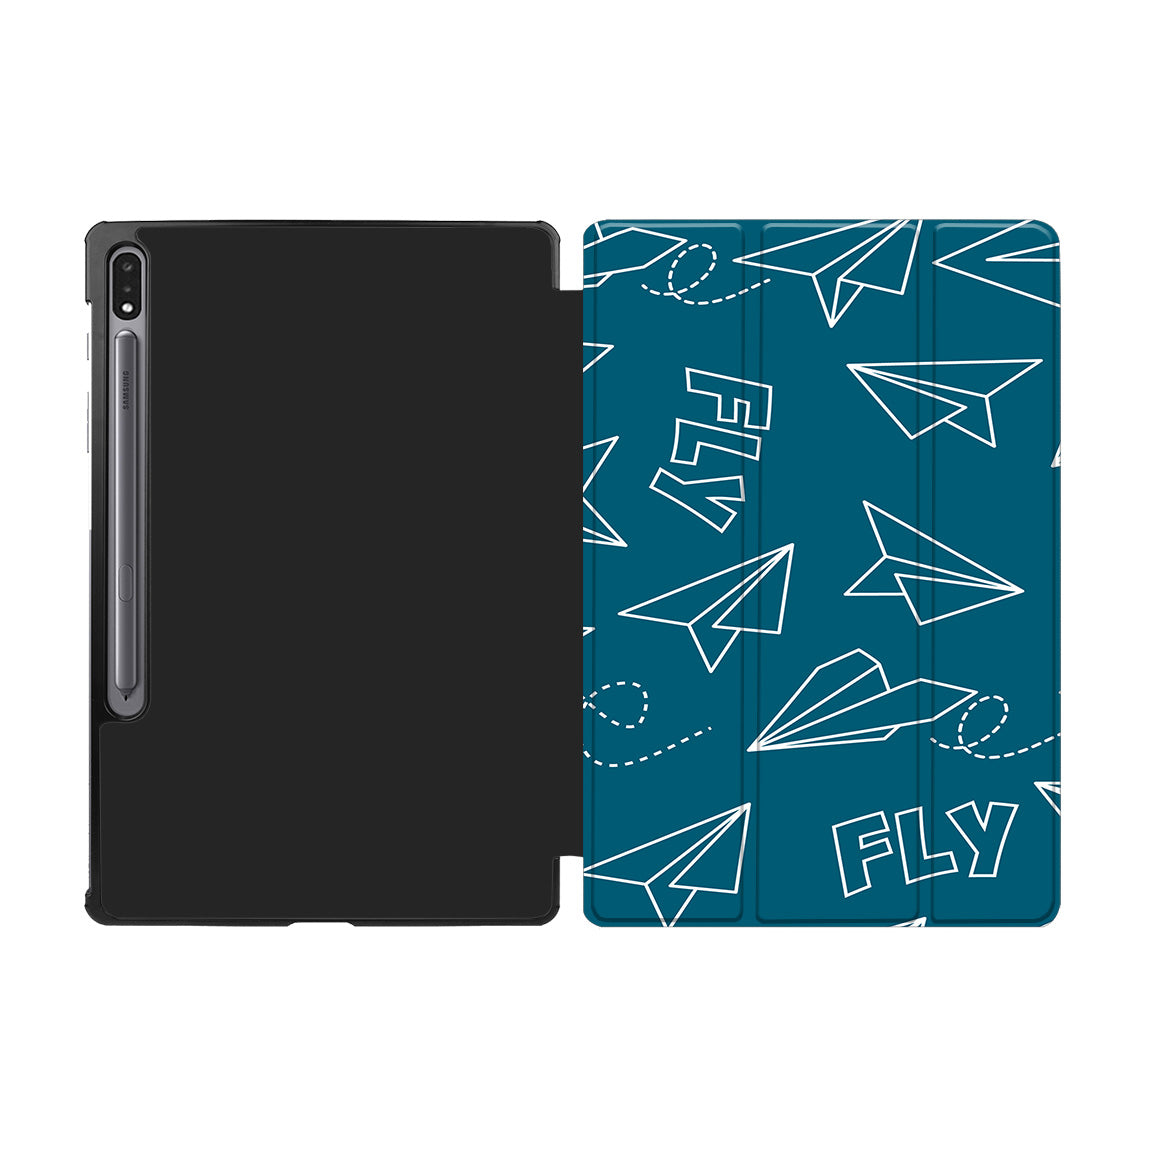 Paper Airplane & Fly-Green Designed Samsung Tablet Cases